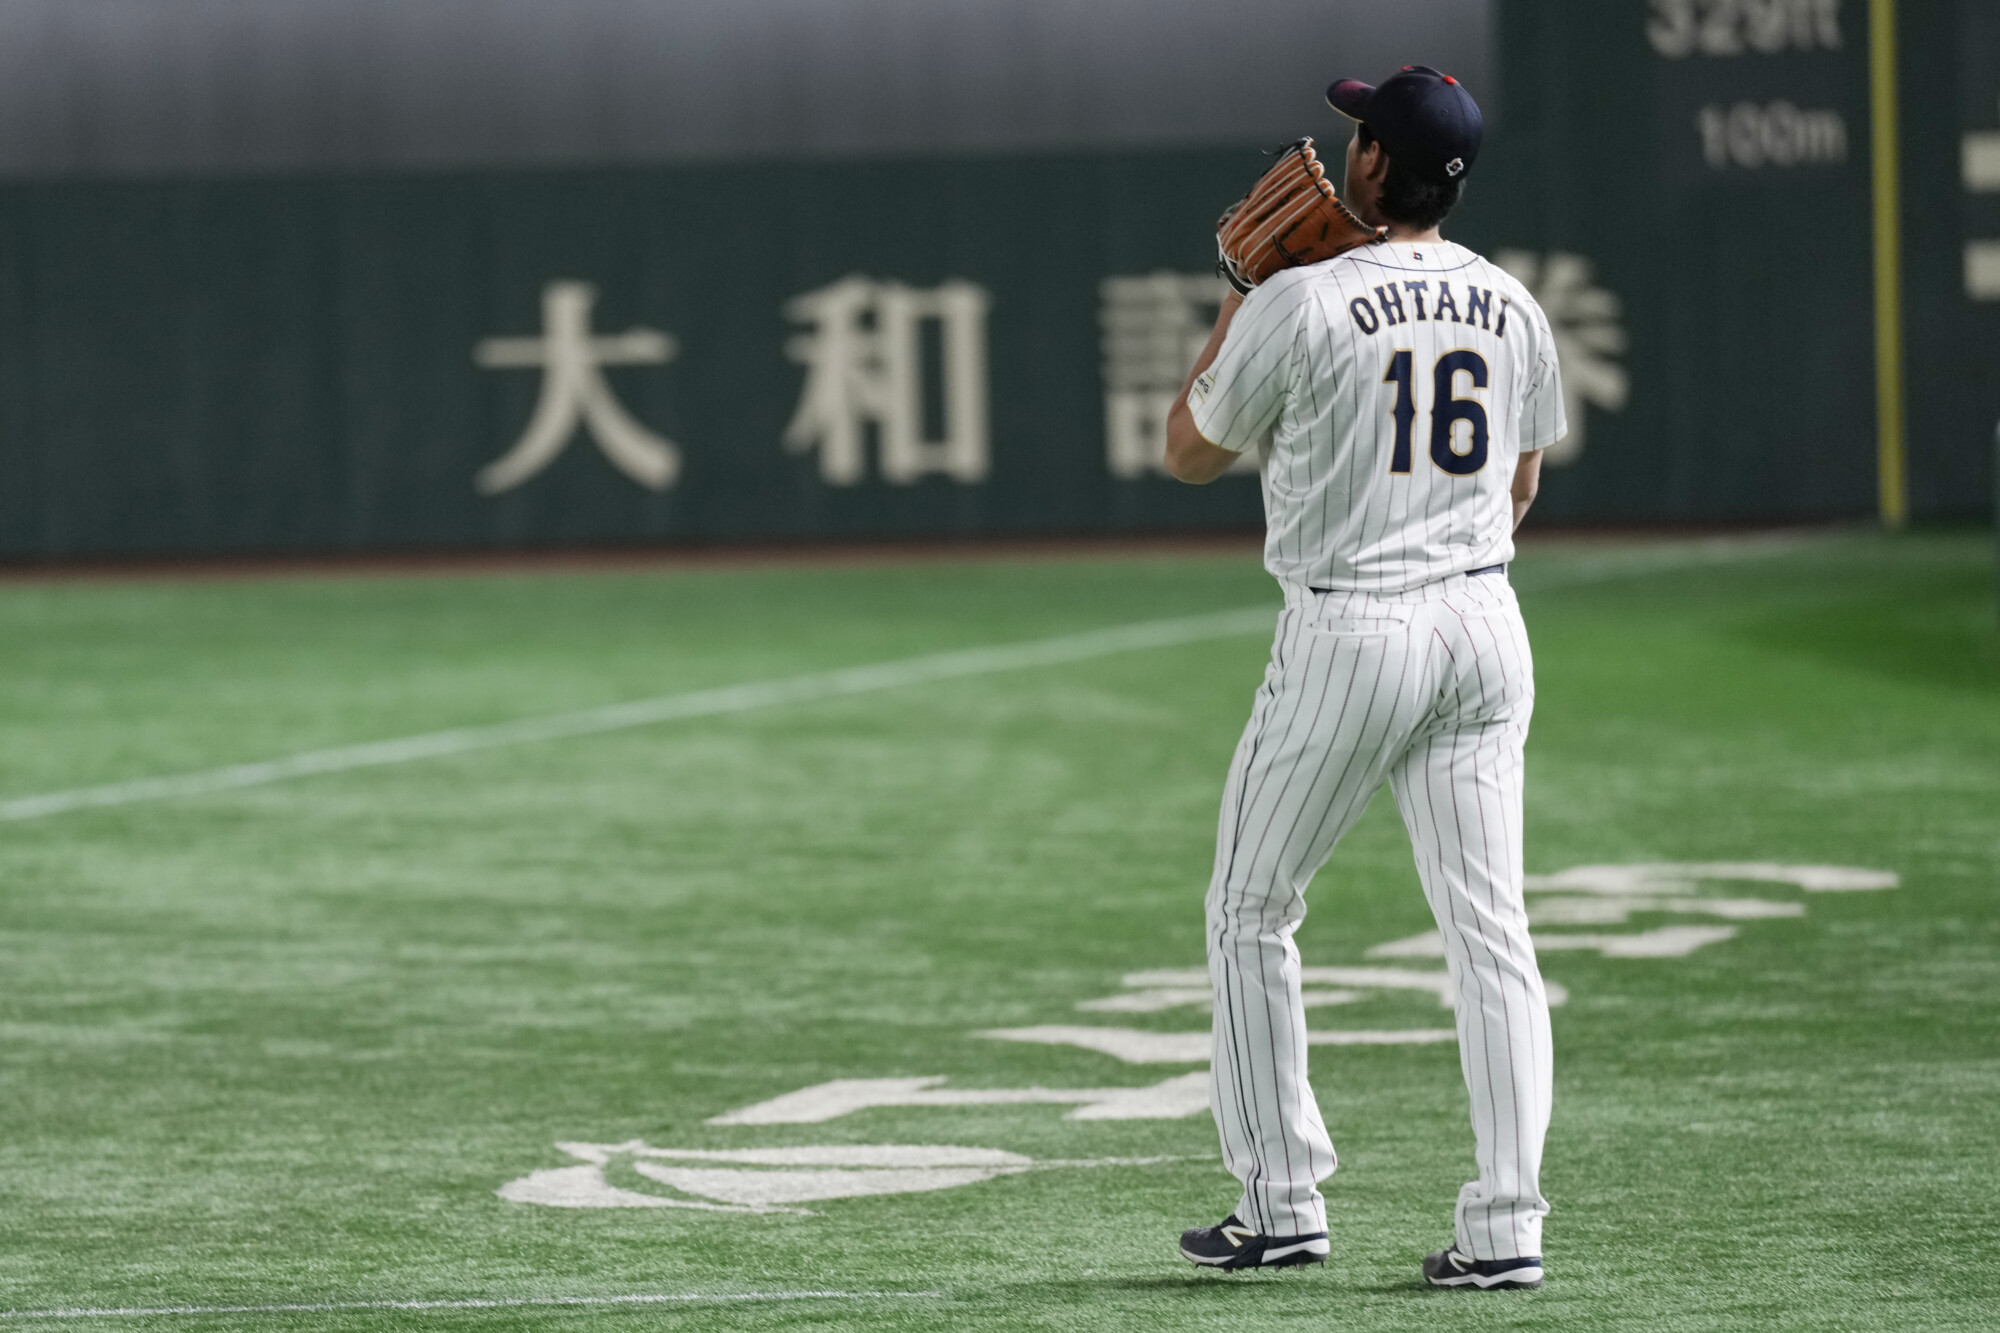 Japan star Ohtani gets green light to hit and pitch in World